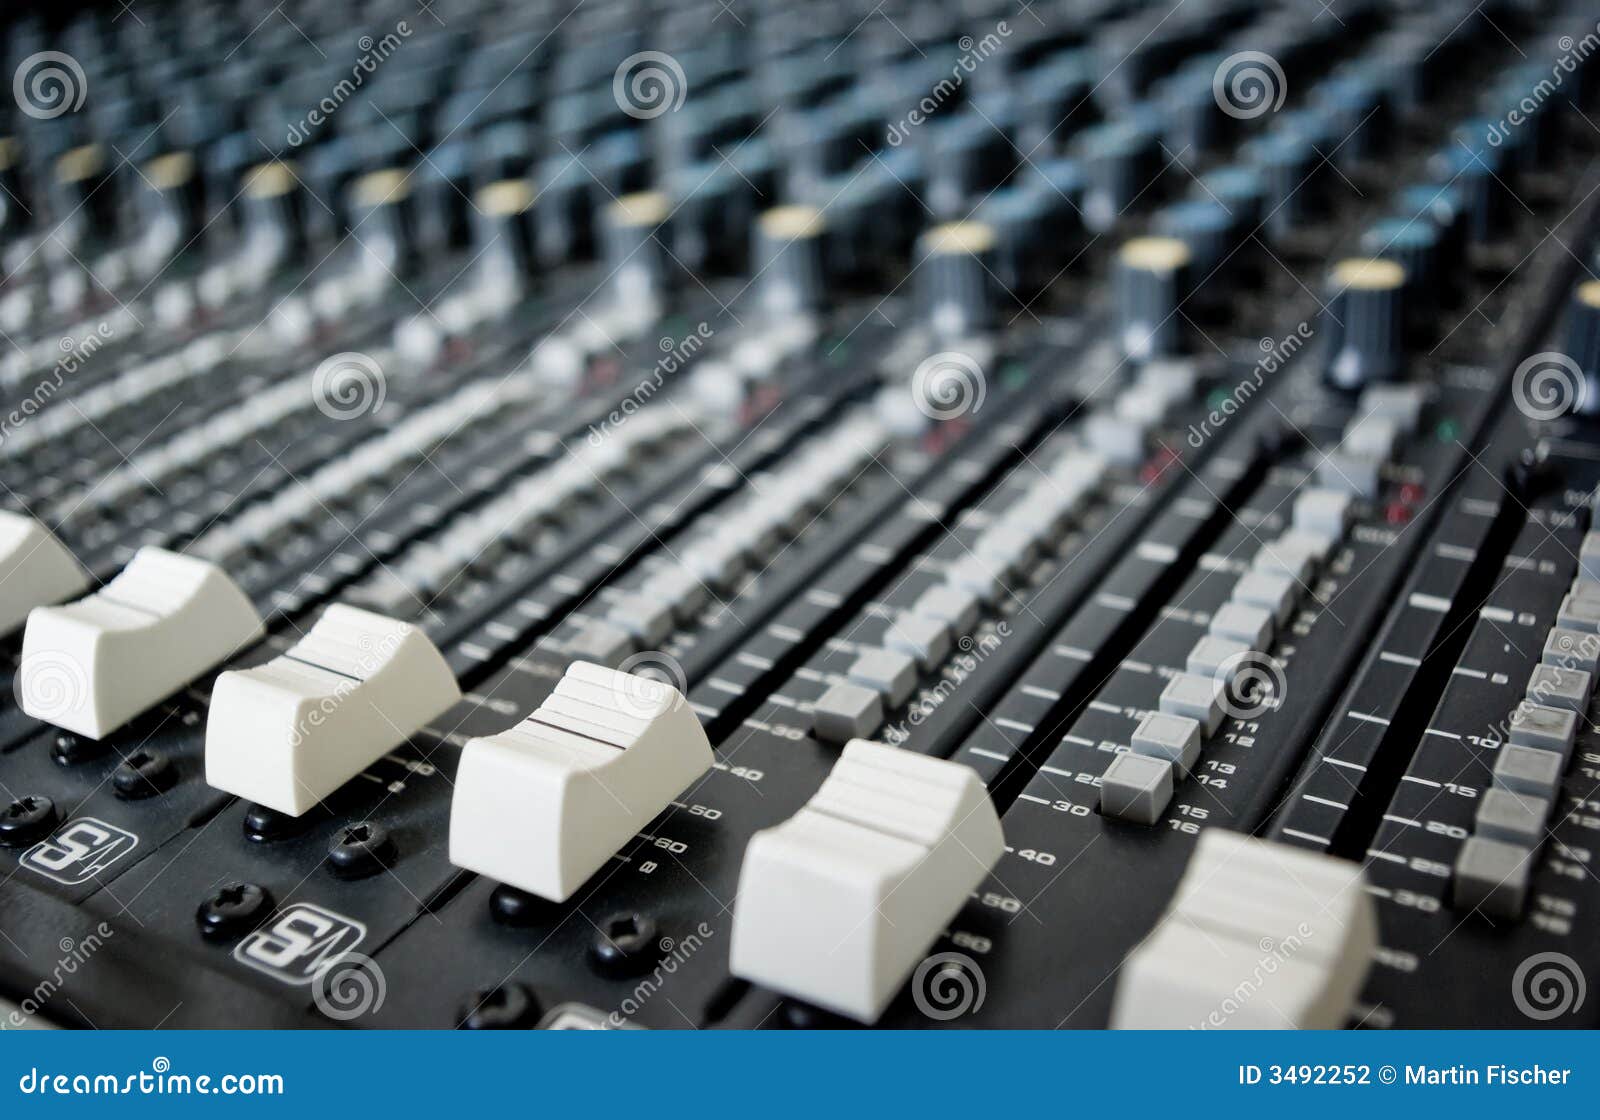 Mixing Desk Fader Switches Stock Photo Image Of Closeup 3492252